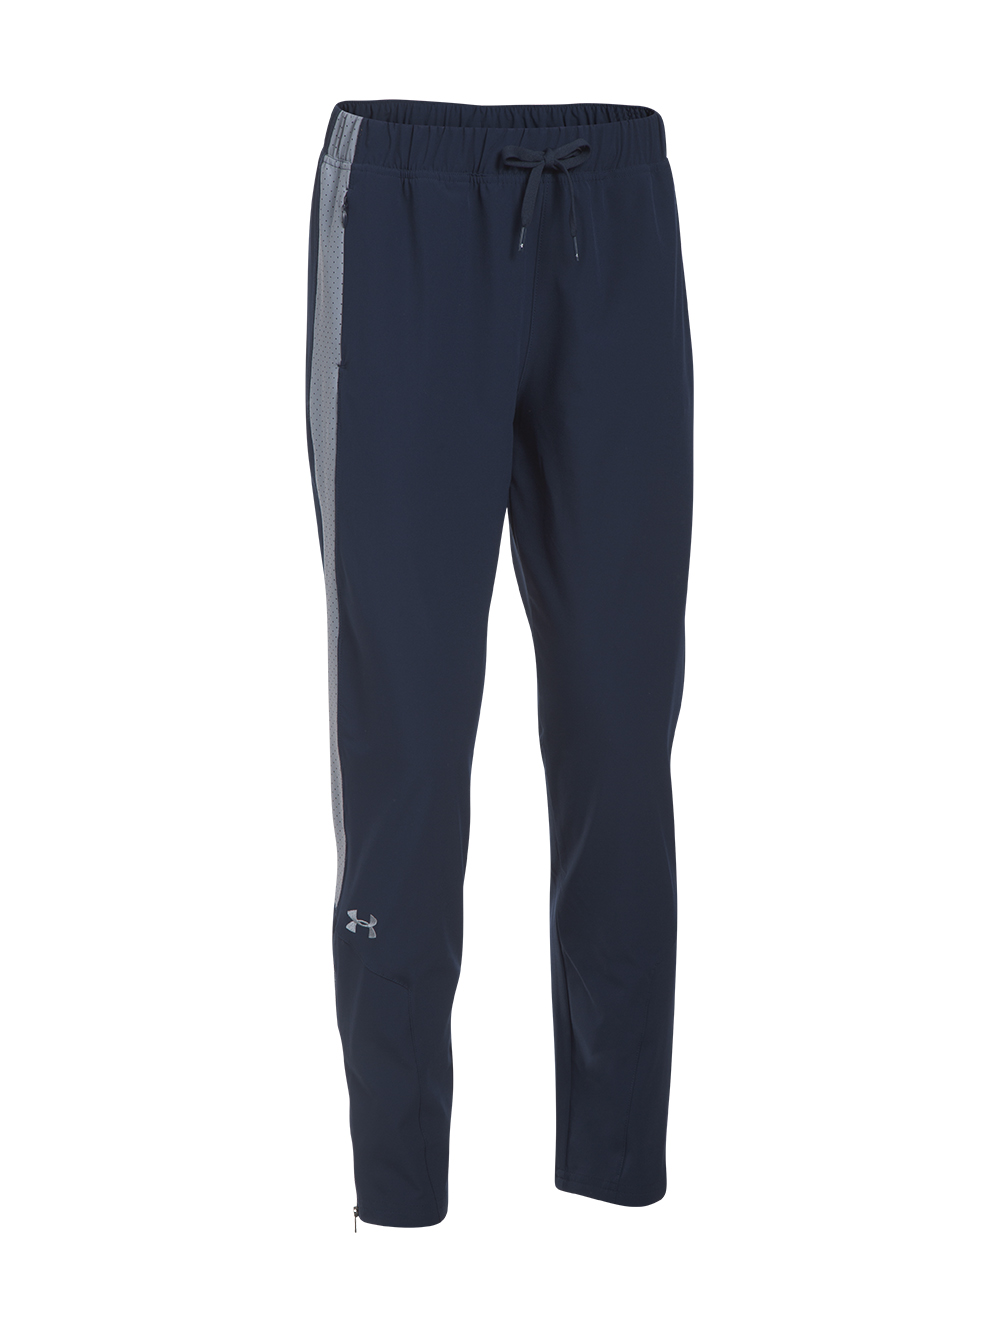 Under Armour Tall Squad Woven Pants | Midwest Volleyball Warehouse